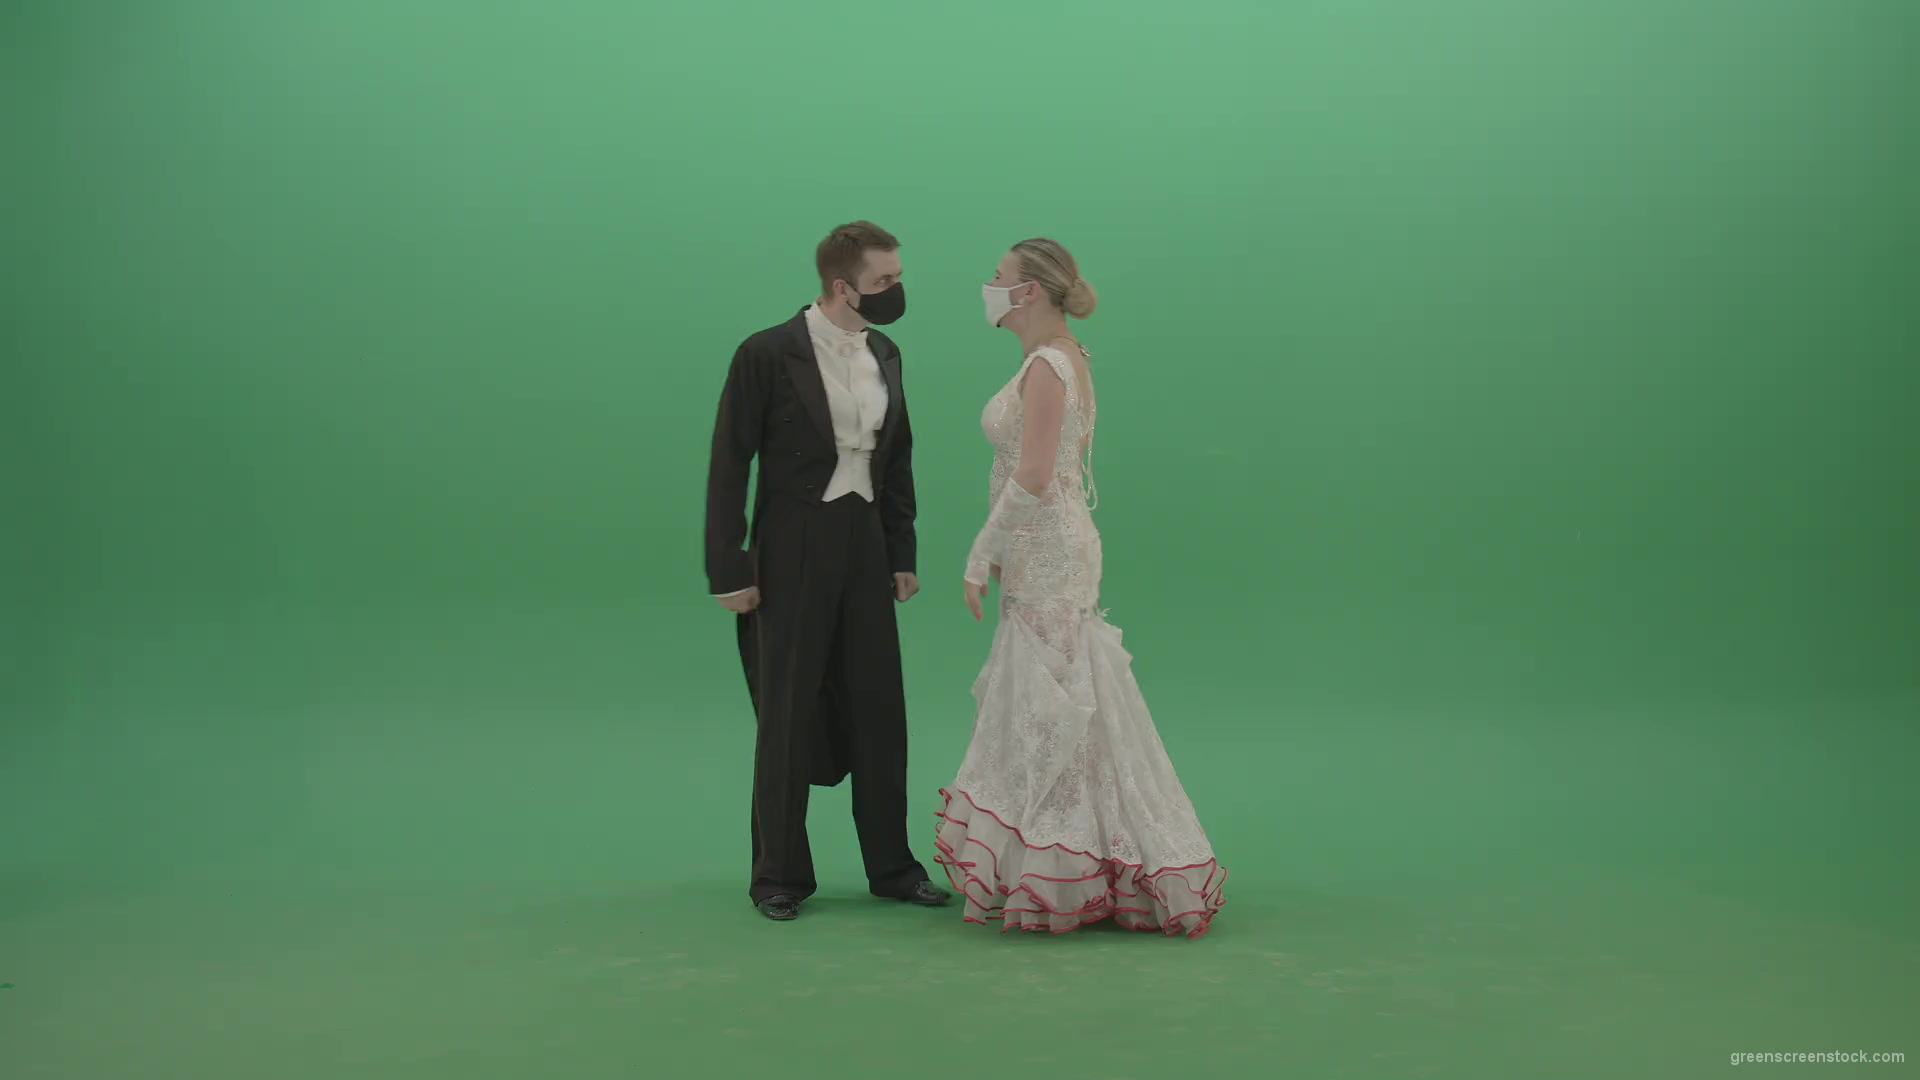 Funny-happy-balleroom-dancers-couple-chilling-and-laughing-on-green-screen-4K-Video-Footage-1920_001 Green Screen Stock